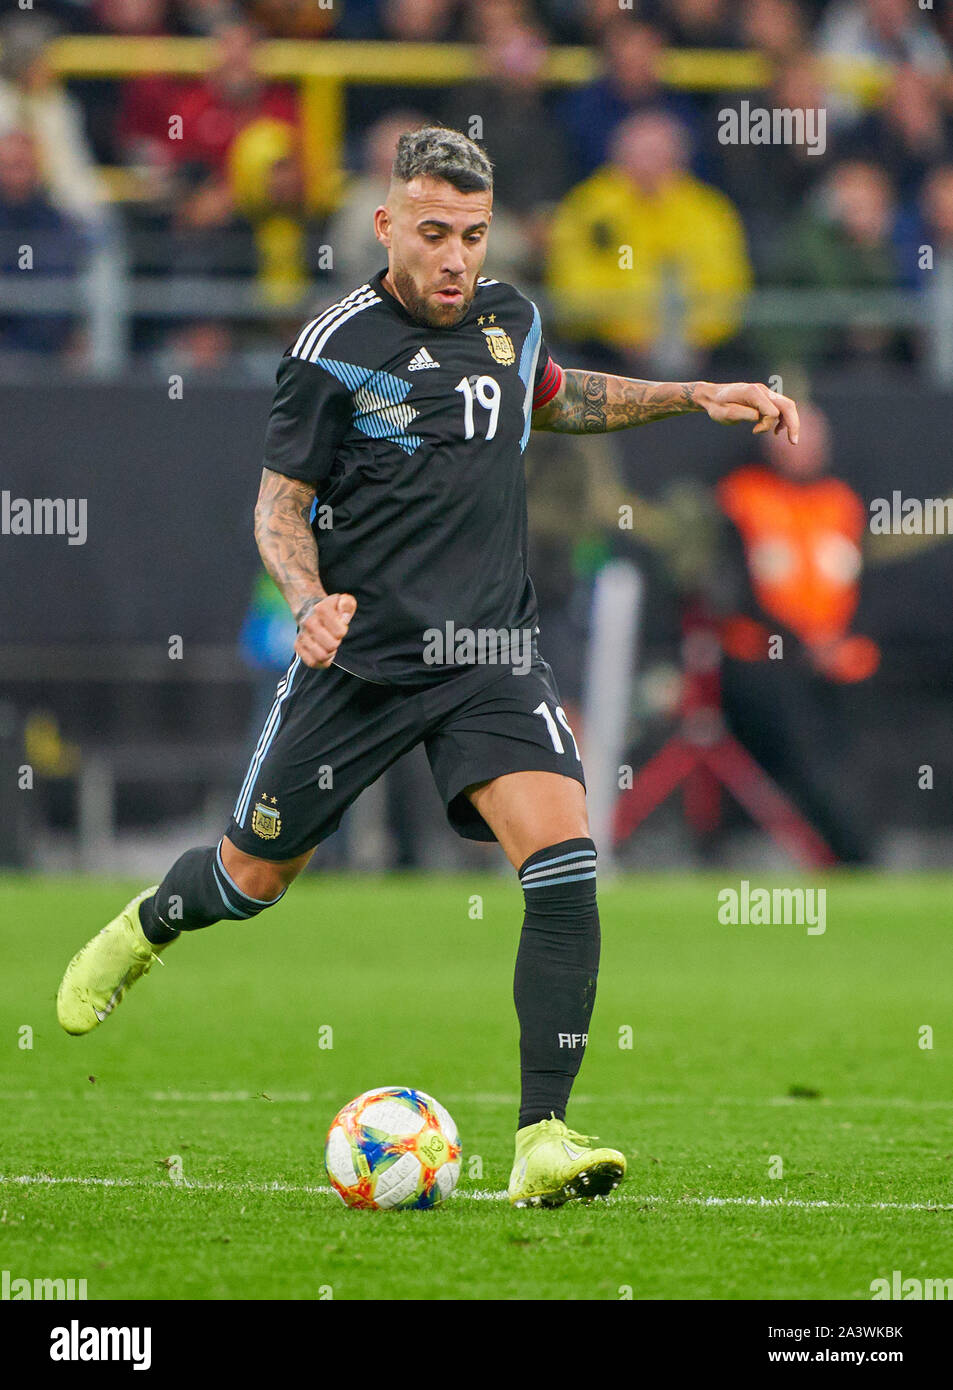 Germany- Argentina, Soccer, Dortmund, October 09, 2019 Nicolas OTAMENDI, Argentina 19  drives, controls the ball, action, full-size, Single action, einzelaktion, with ball, full body, whole figure, cutout, single shots, ball treatment, pick-up, header, cut out, Ganzkoerperaufnahme,  GERMANY - ARGENTINA 2-2 friendly match,  German Football National team, DFB , Season 2019/2020,  October 09, 2019 in Dortmund, Germany. © Peter Schatz / Alamy Live News Stock Photo